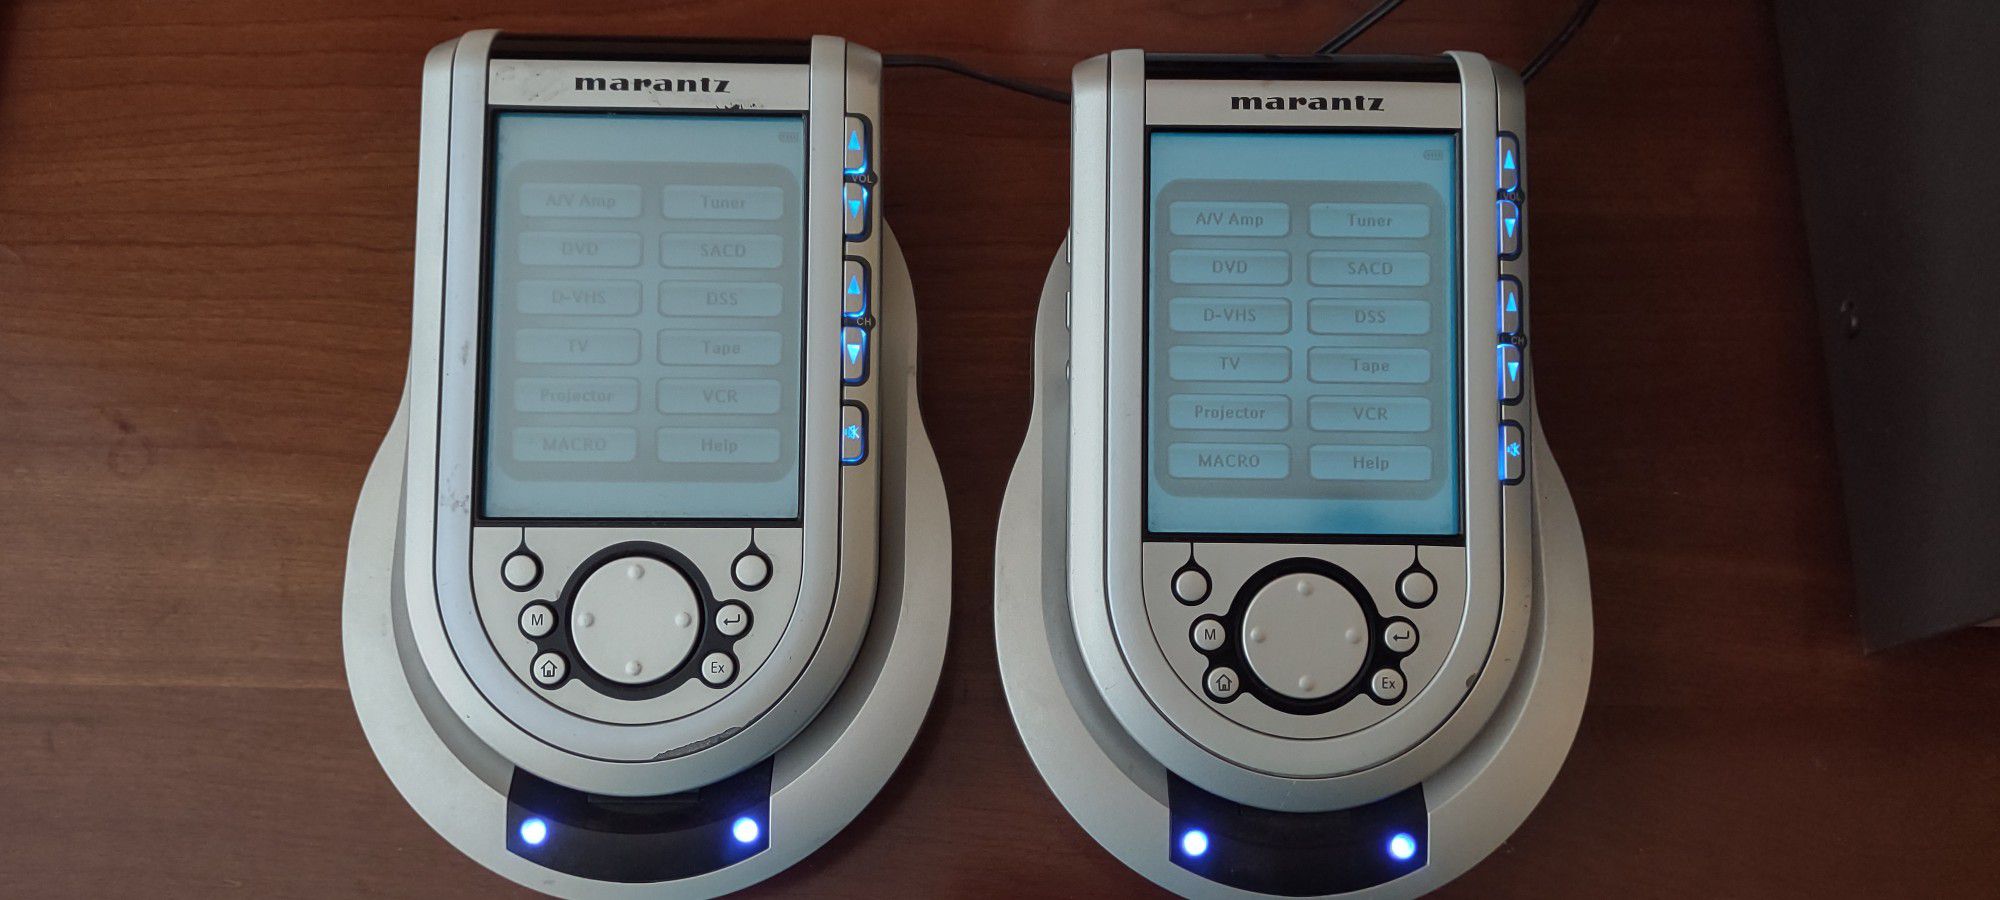 Two Marantz RC5400 Universal Remotes With Charging Cradles 